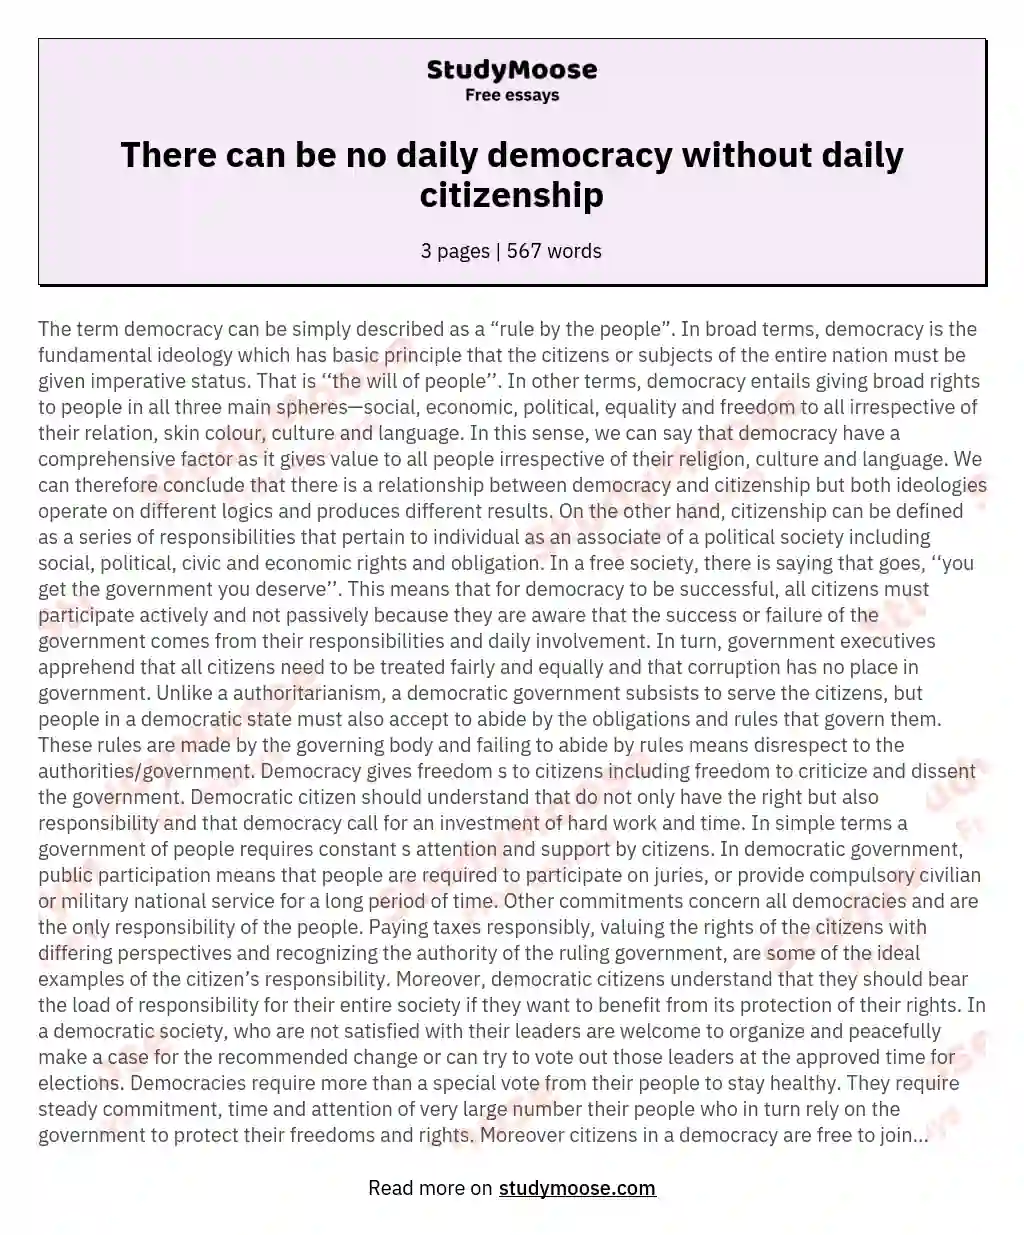 There can be no daily democracy without daily citizenship